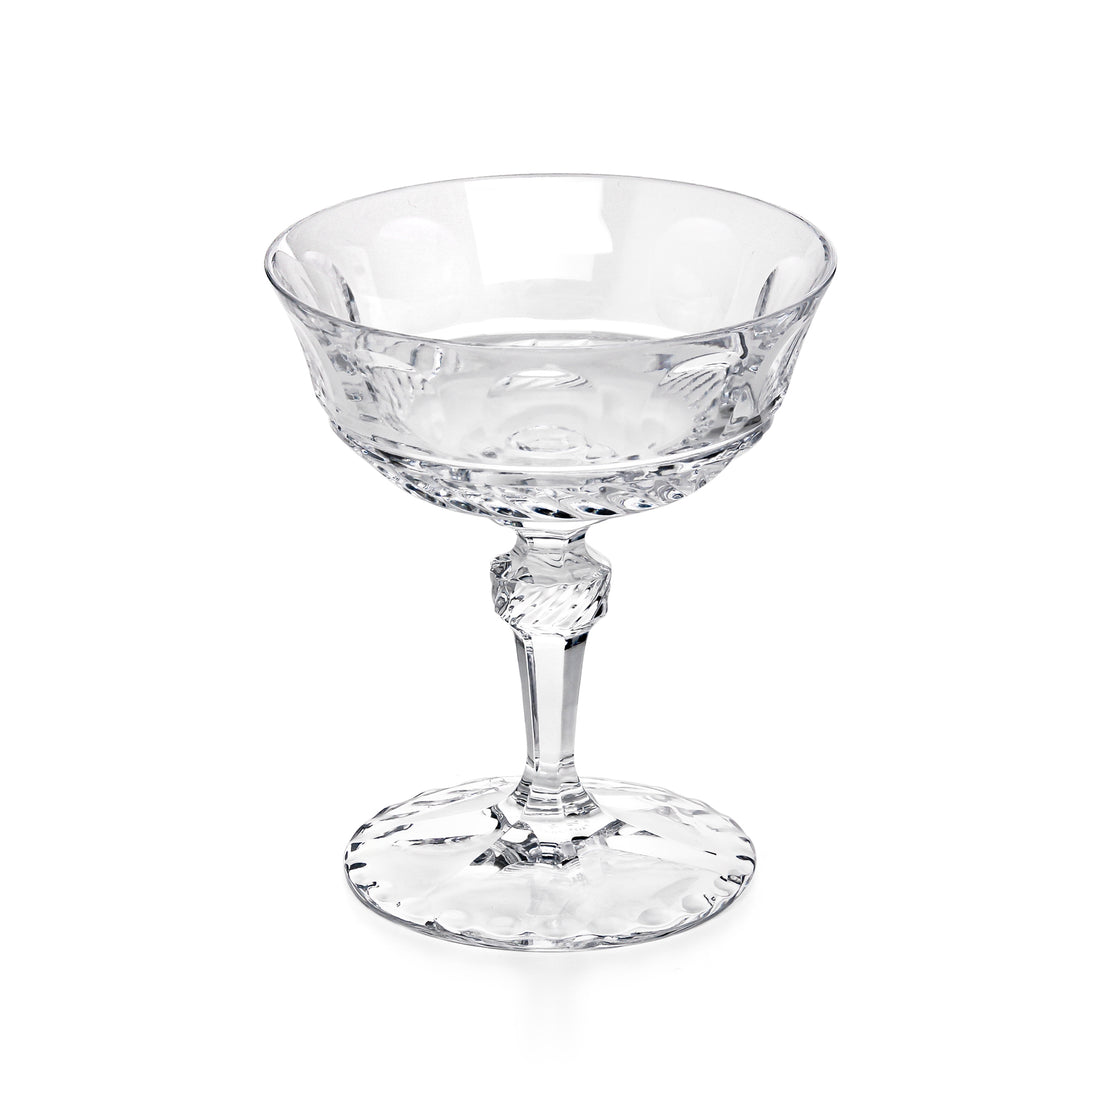 VILLEROY & BOCH Imperial Champagne Coupes/Desserts - Set of 6